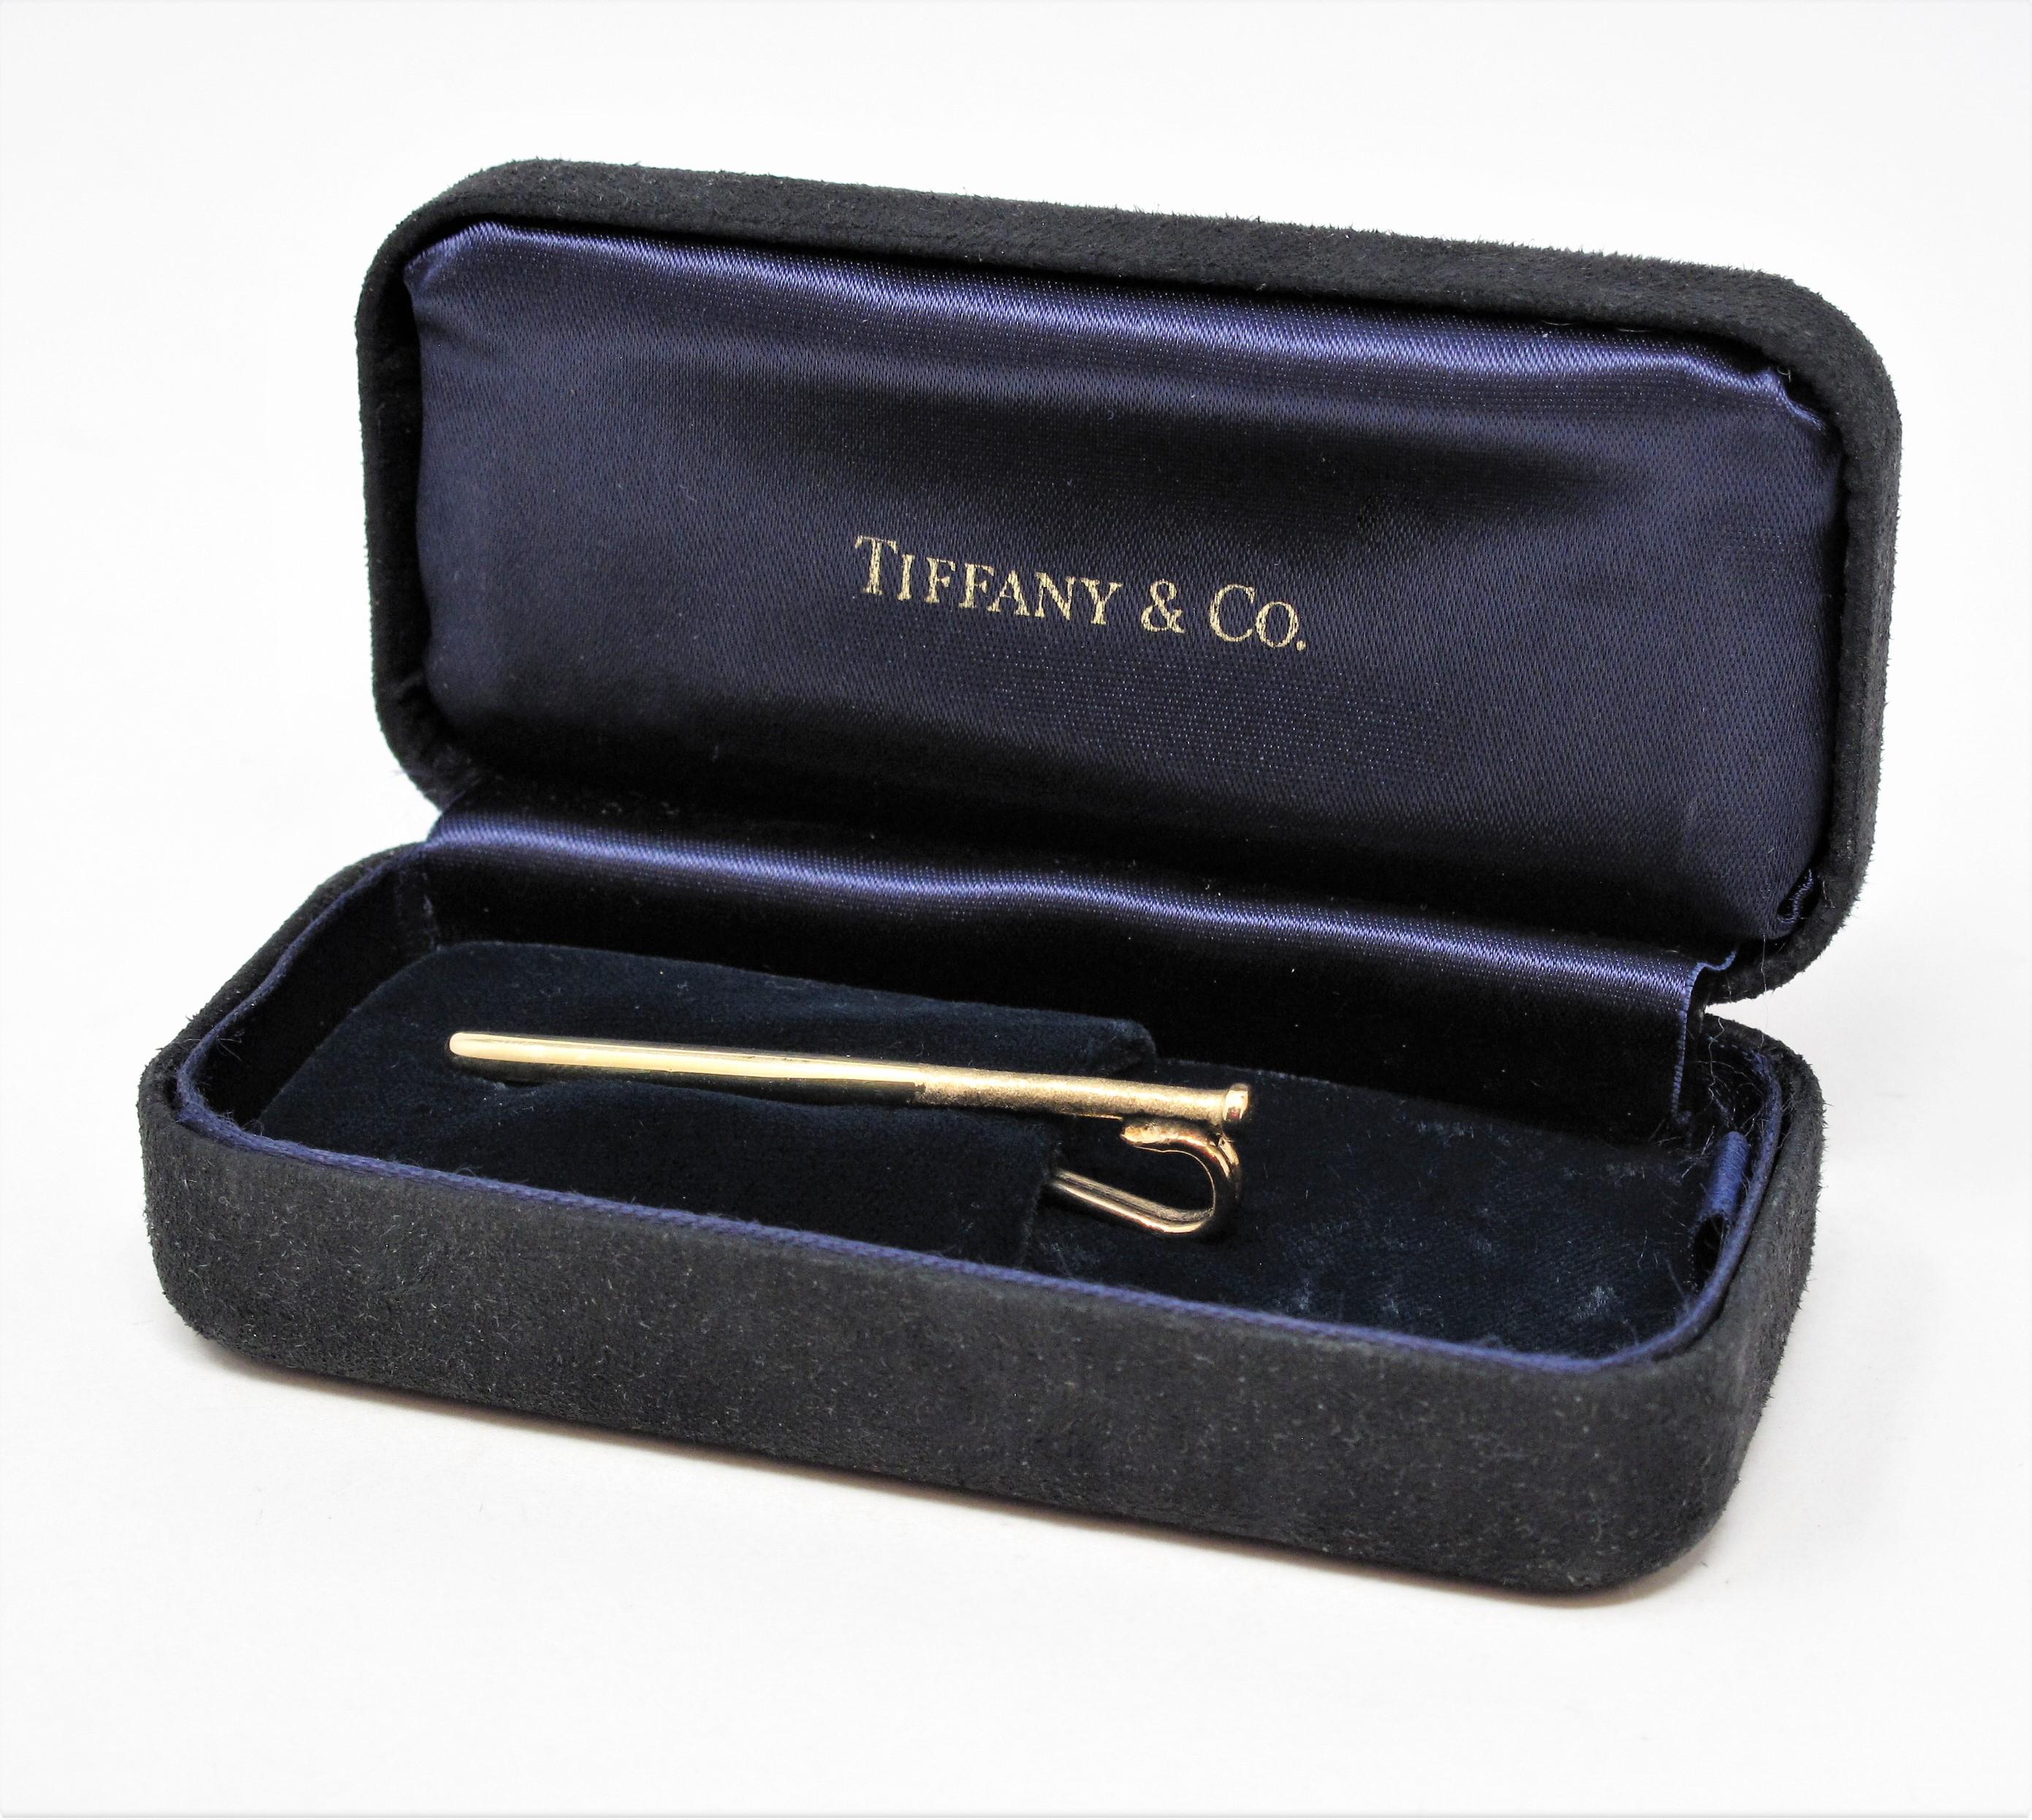 Rare vintage Tiffany & Co. mens baseball bat money clip / tie bar in 14 karat yellow gold. This elegant and versatile piece is perfect for the sports enthusiast in your life!

This unique item from Tiffany & Co. features a polished 14 karat yellow